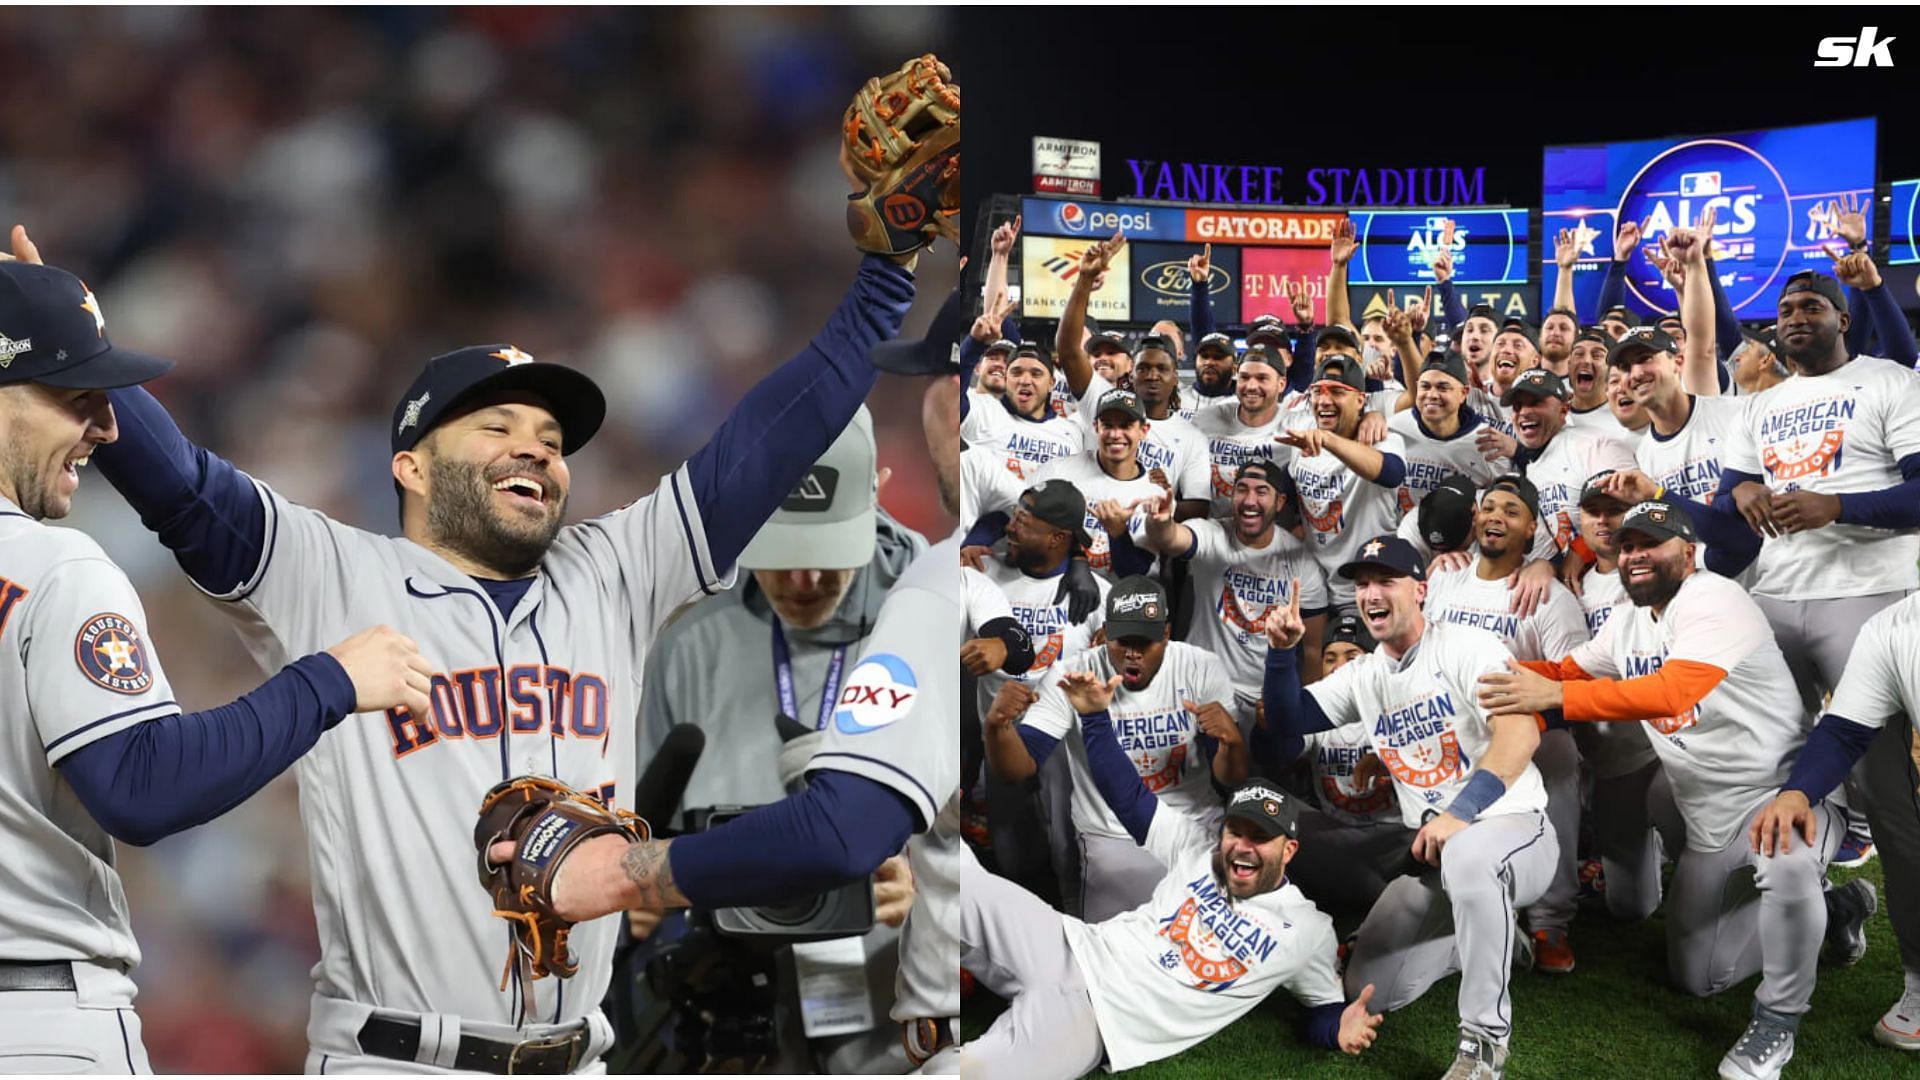 MLB Podcaster plays down Astros seven straight ALCS appearences 